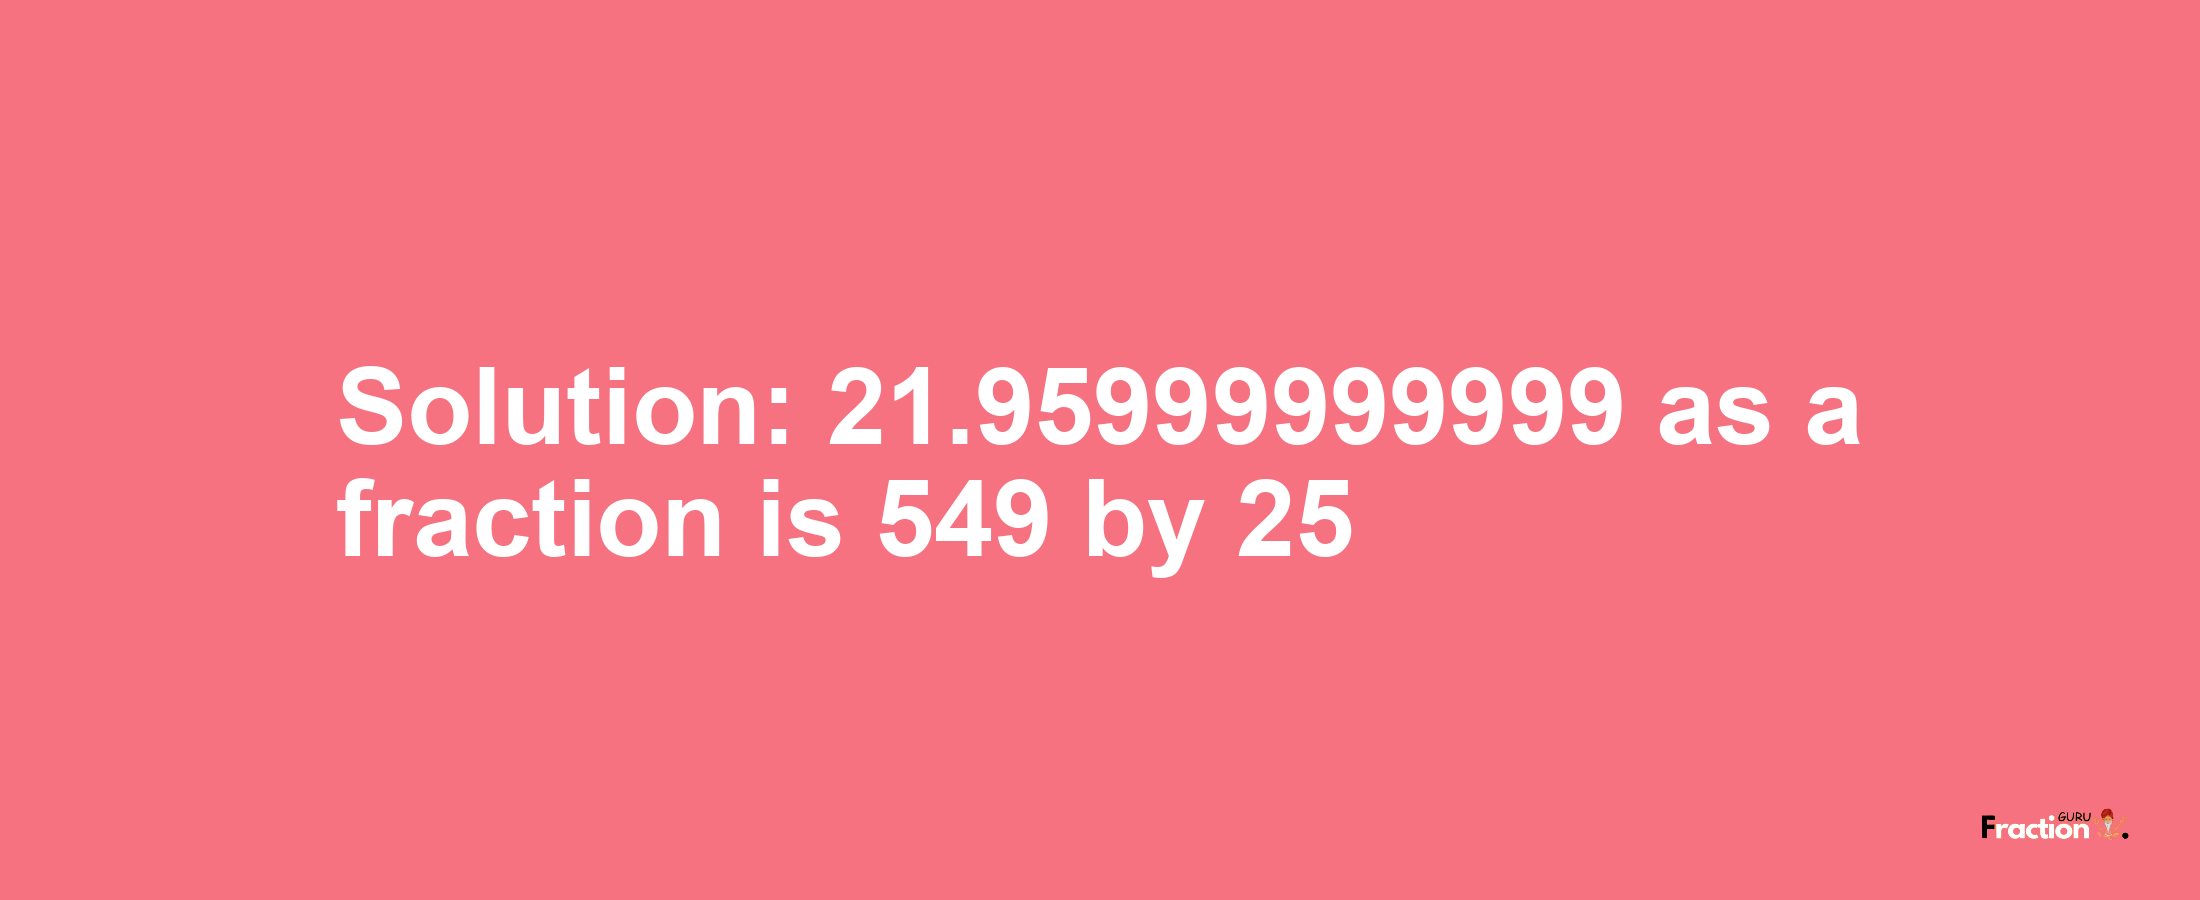 Solution:21.95999999999 as a fraction is 549/25